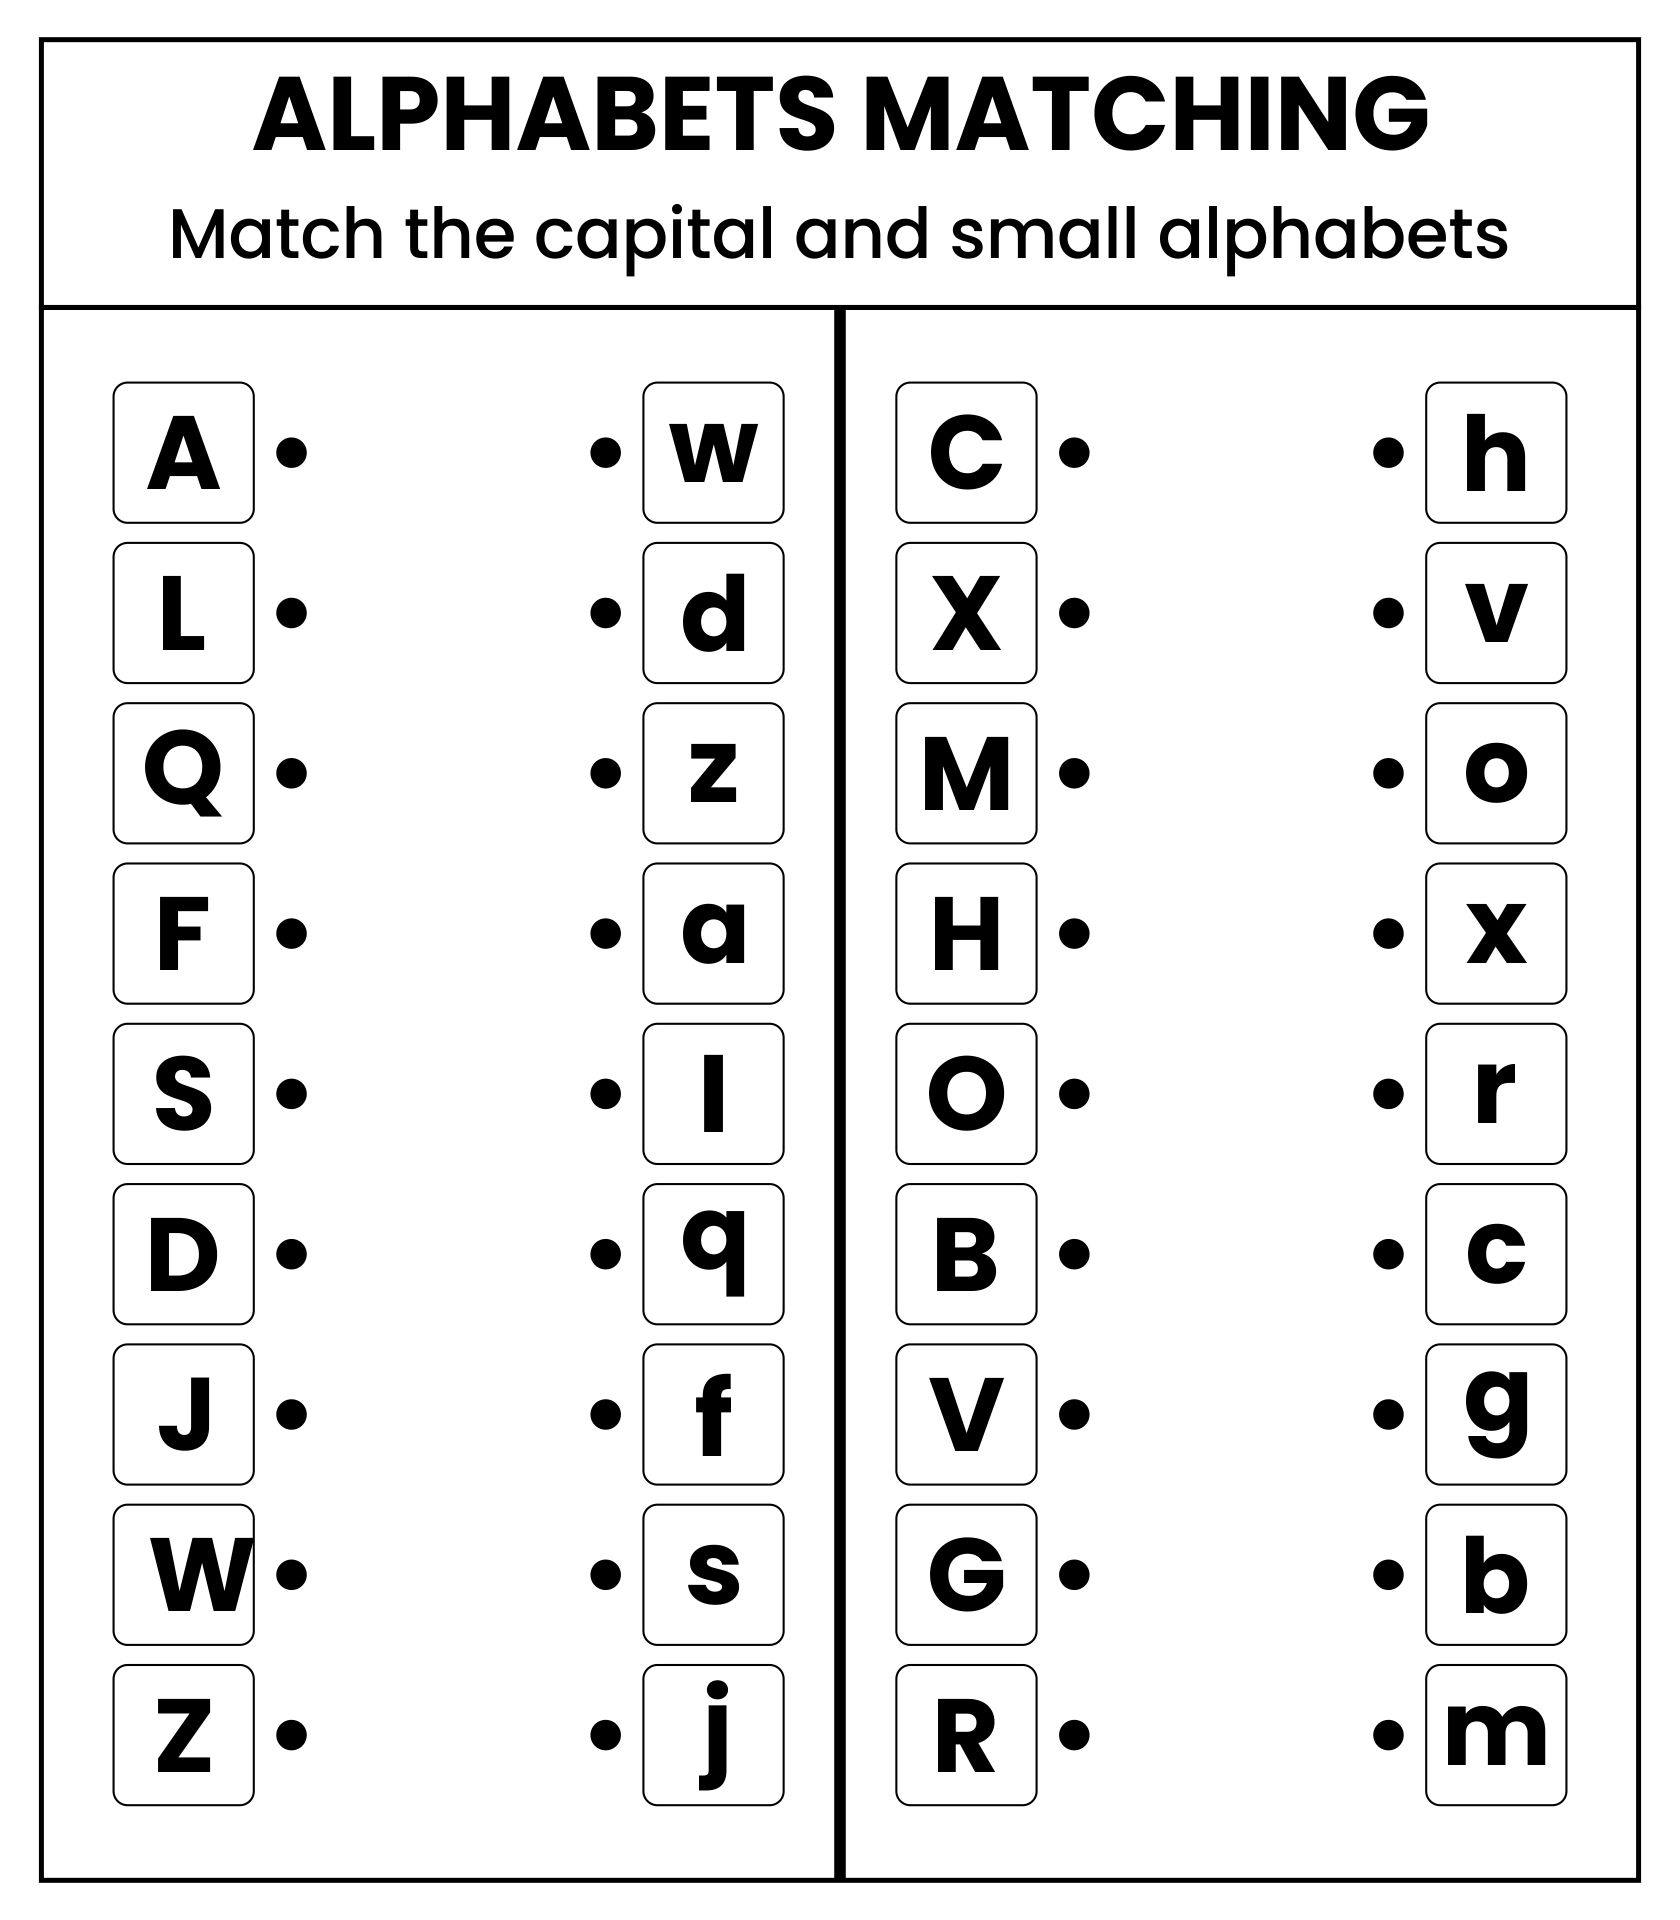 matching alphabet with word for spelling